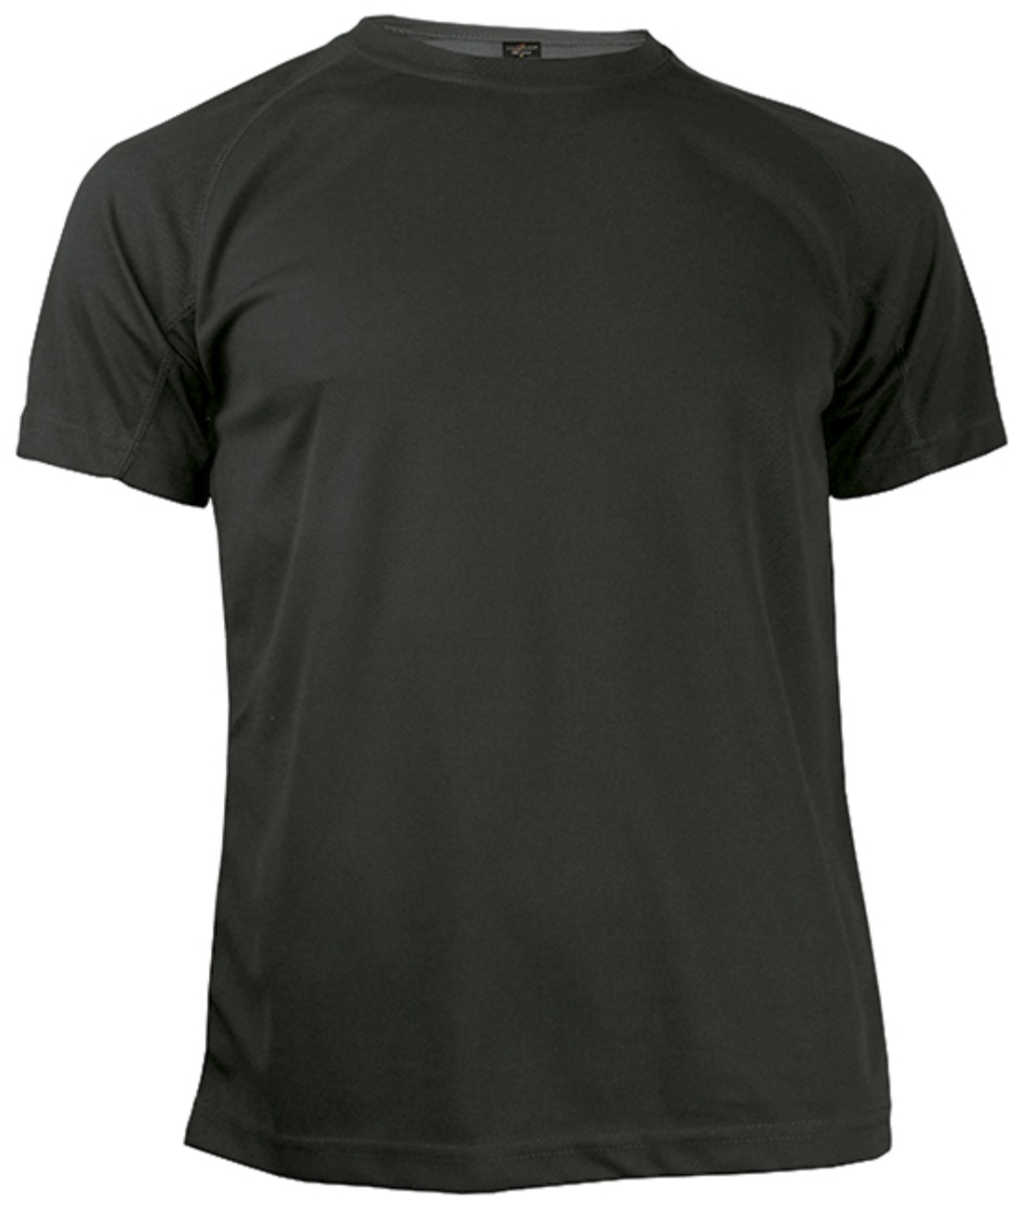 BREATHABLE TECHNICAL T-SHIRTS TO PRACTICE SPORTS EuropeStock offers ...